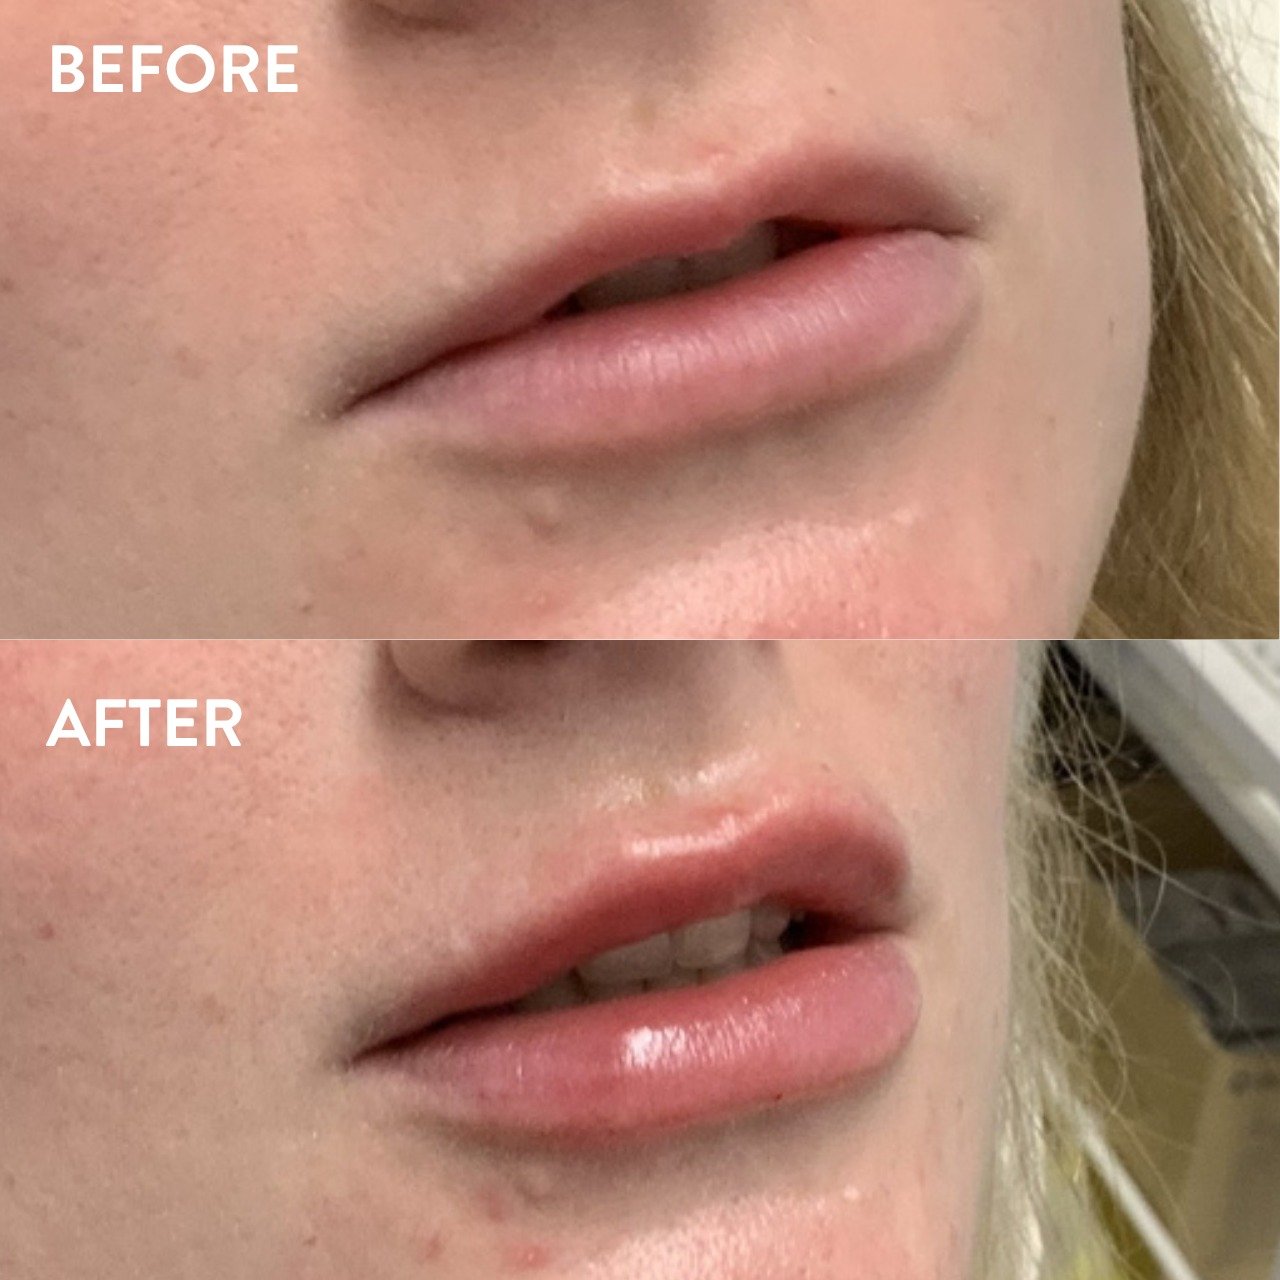 Lip filler is an option for those looking to add balance to their lips or enhance the volume or shape for a fuller or more defined appearance.

If you've been interested in lip filler, book a free consult with our Registered Nurses to find out more.
